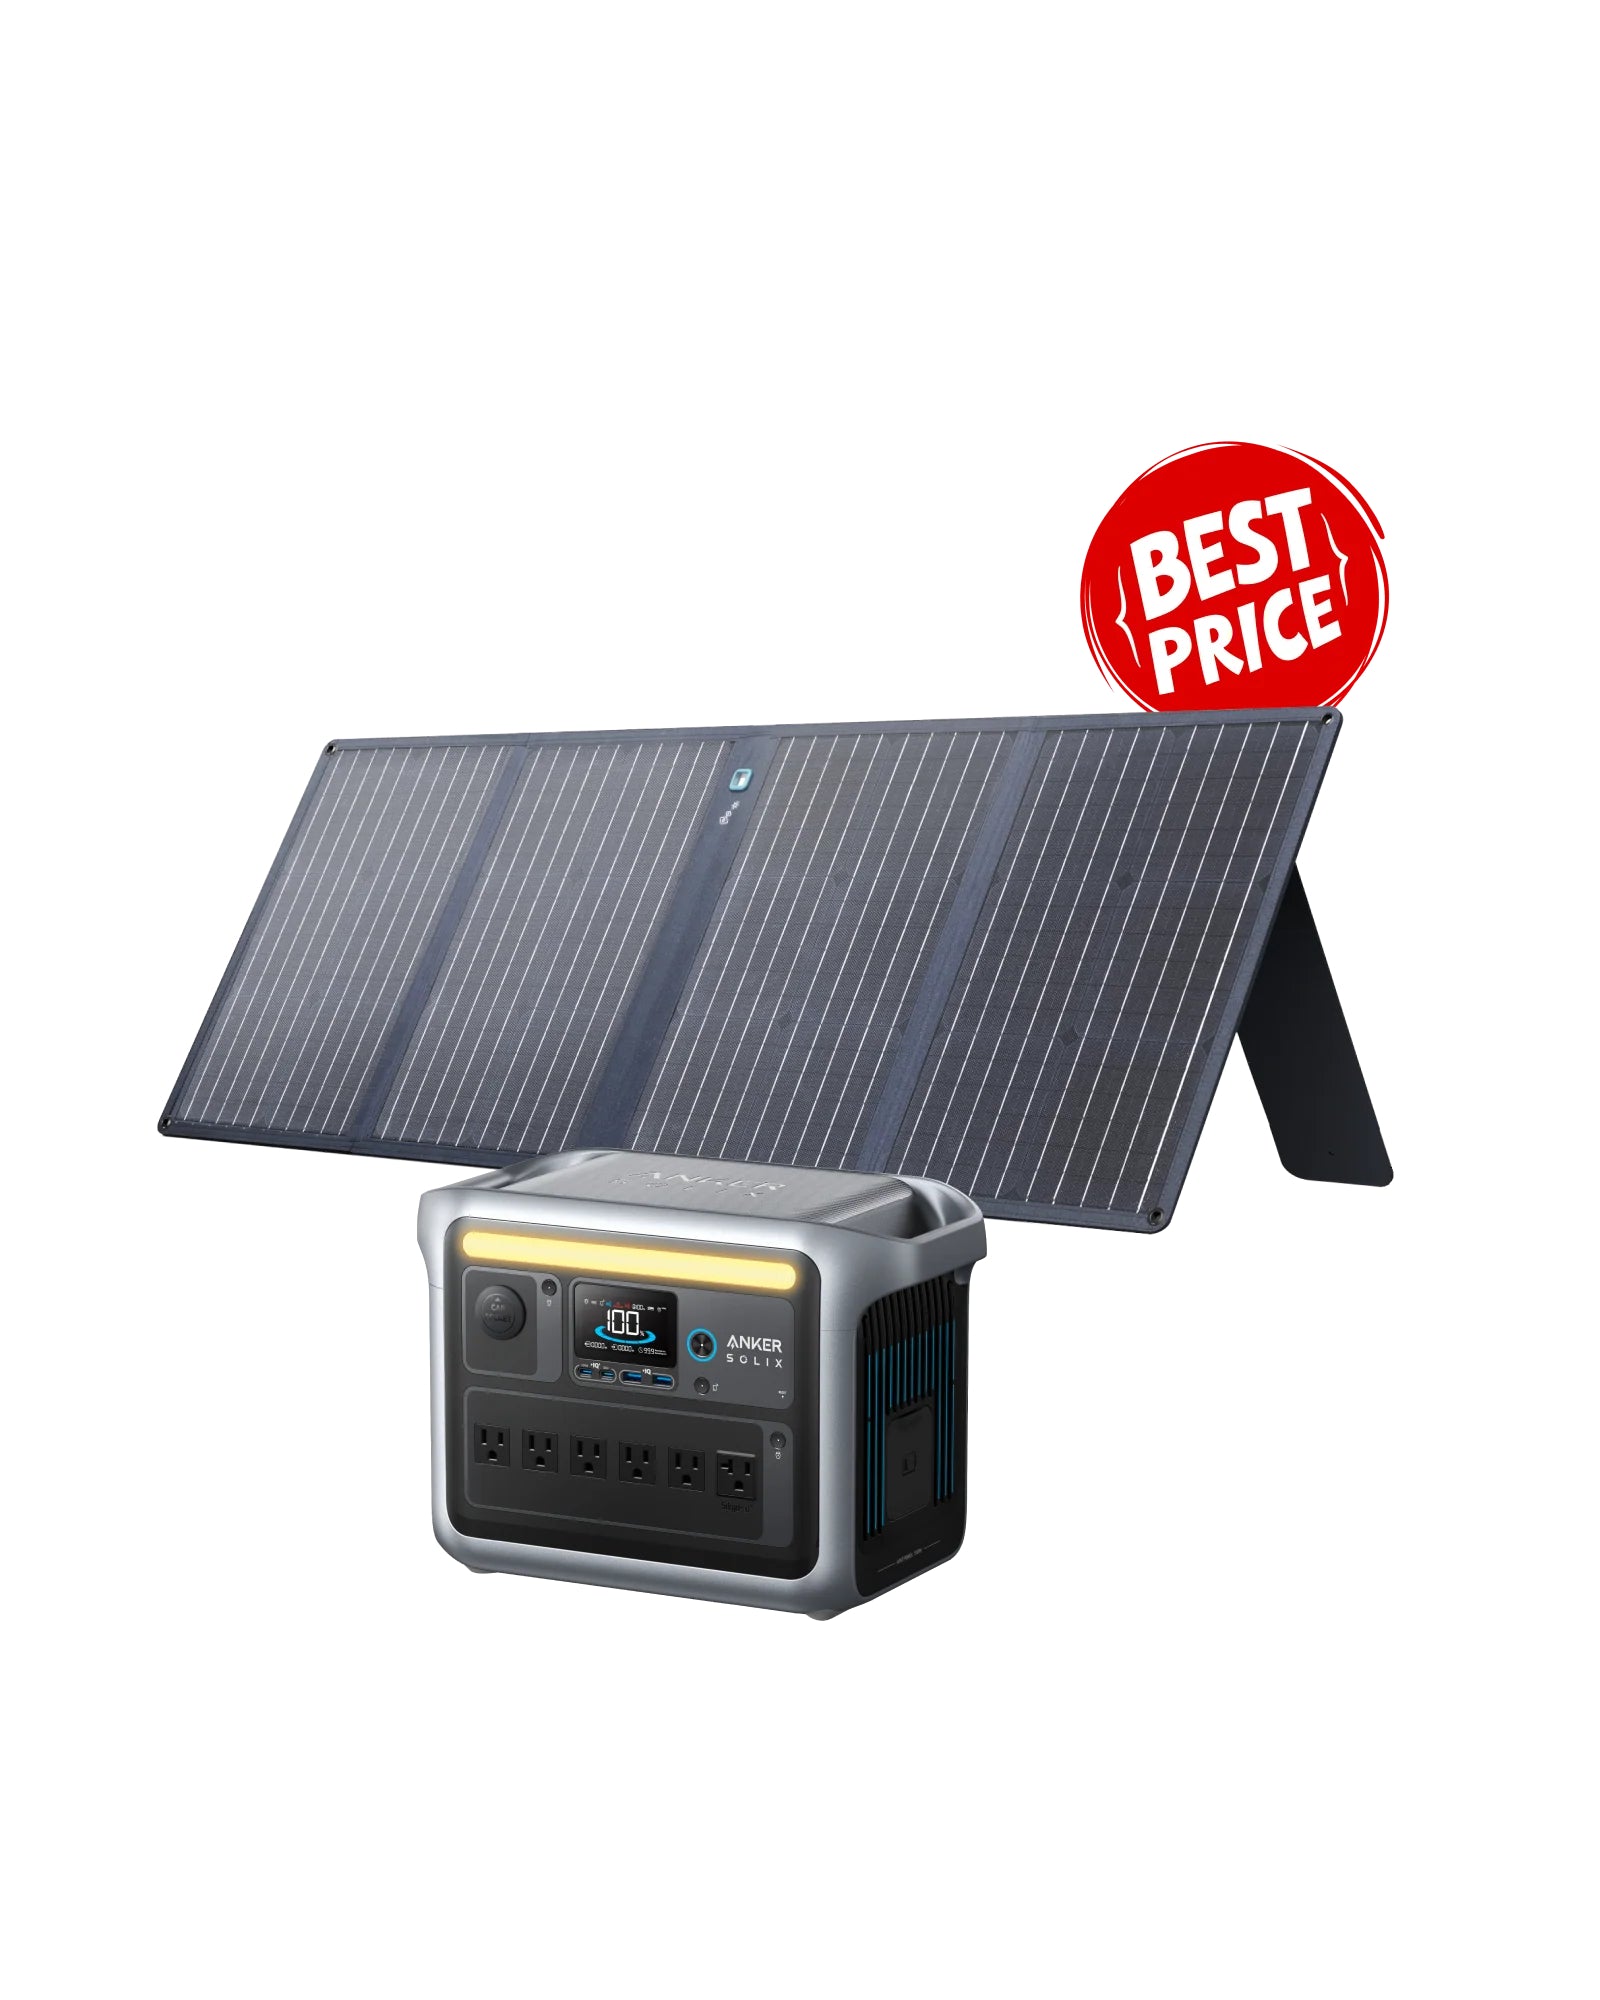 Solar & Battery Powered - Anker SOLIX C1000X Portable Power Station - 1056Wh | 1800W With Anker 625 Solar Panel 100W